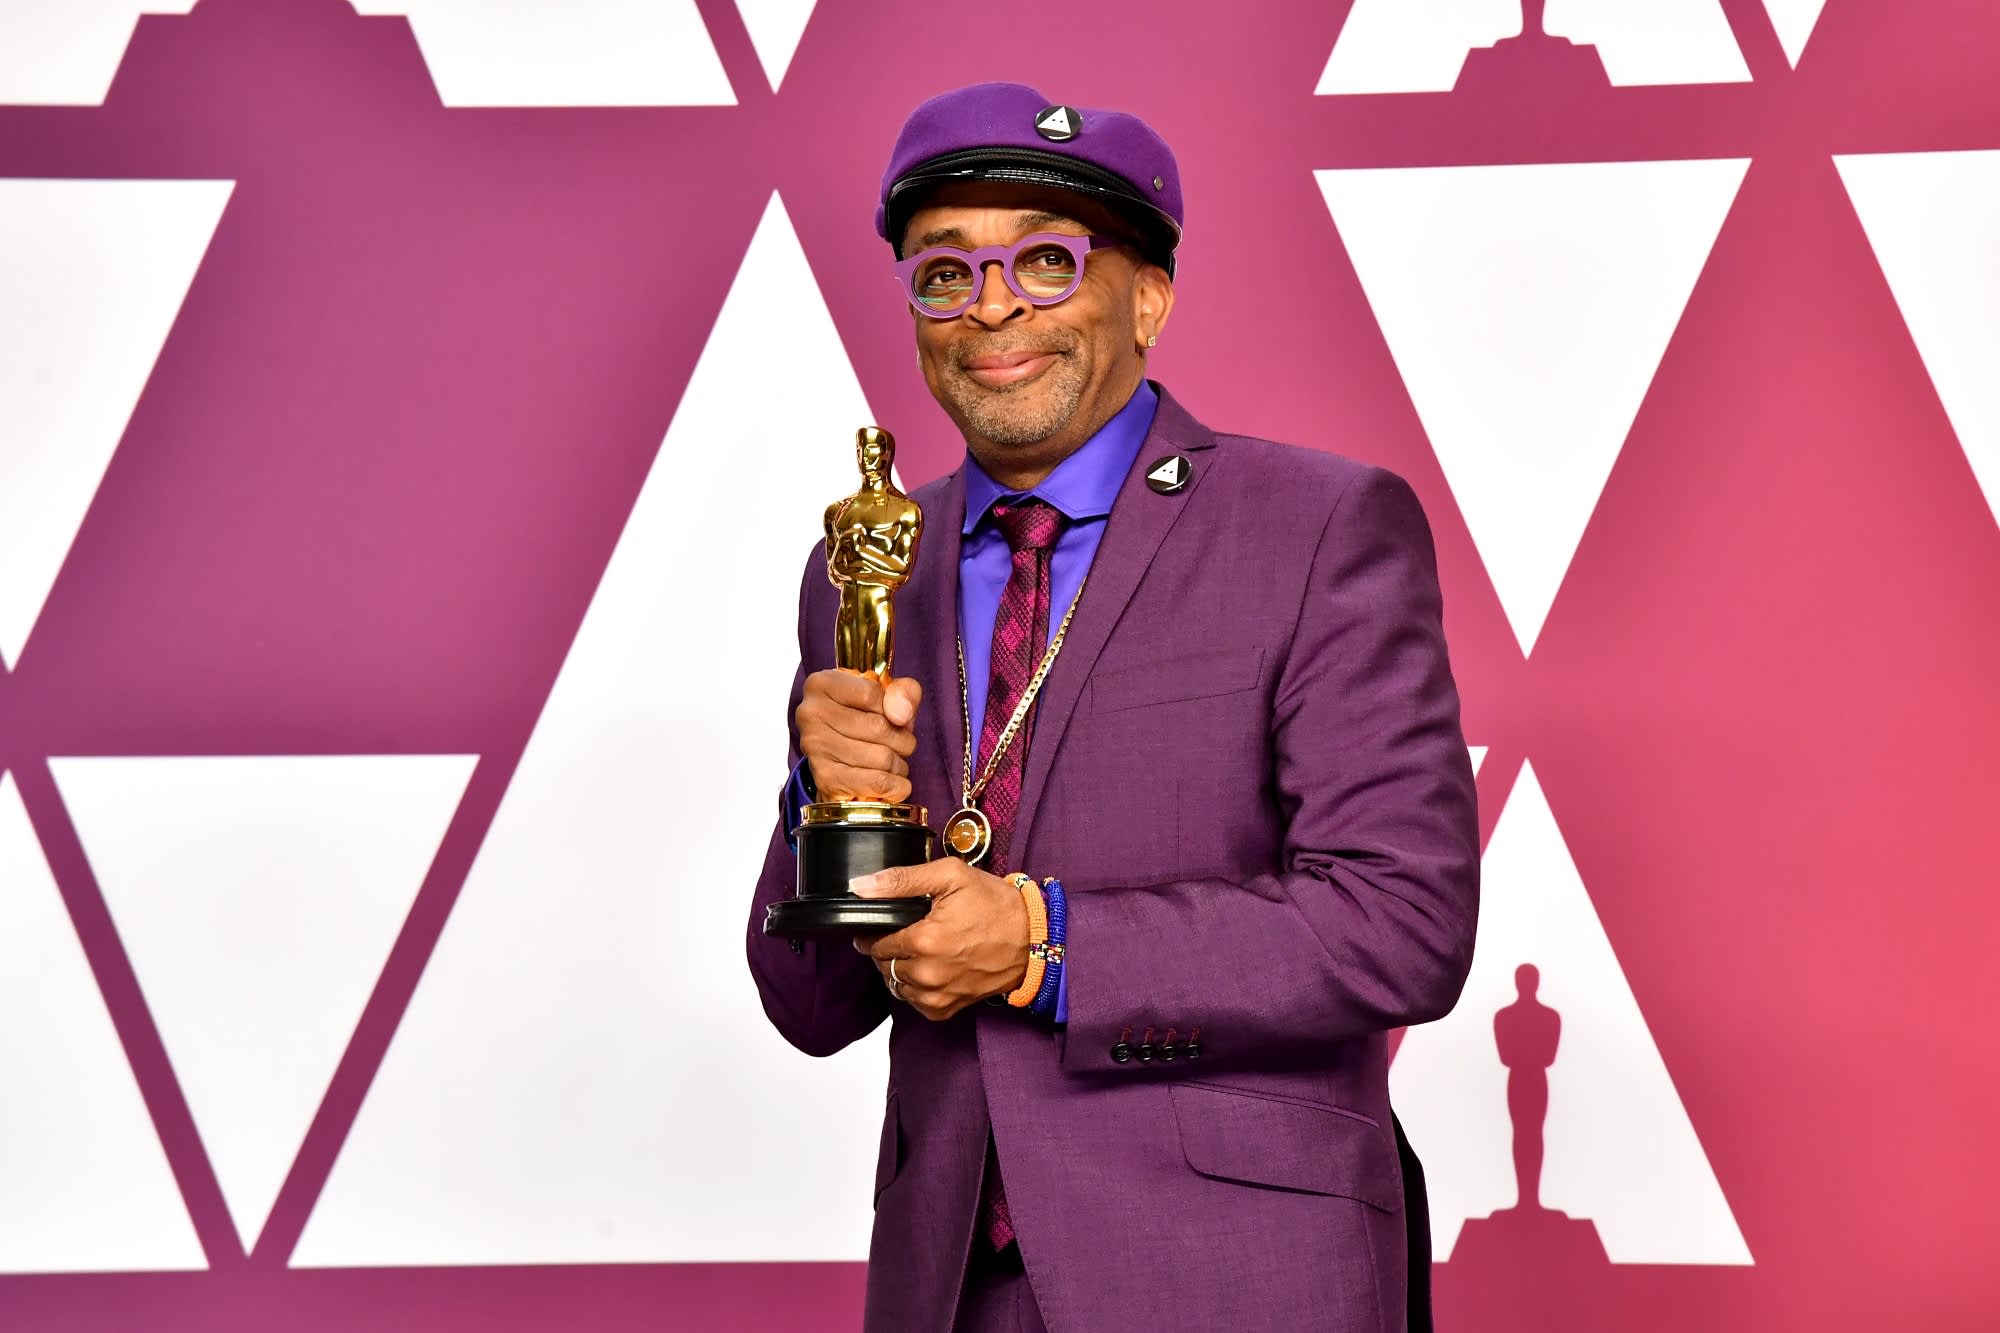 Spike Lee wins his first Oscar, 30 years after 'Do the Right Thing'